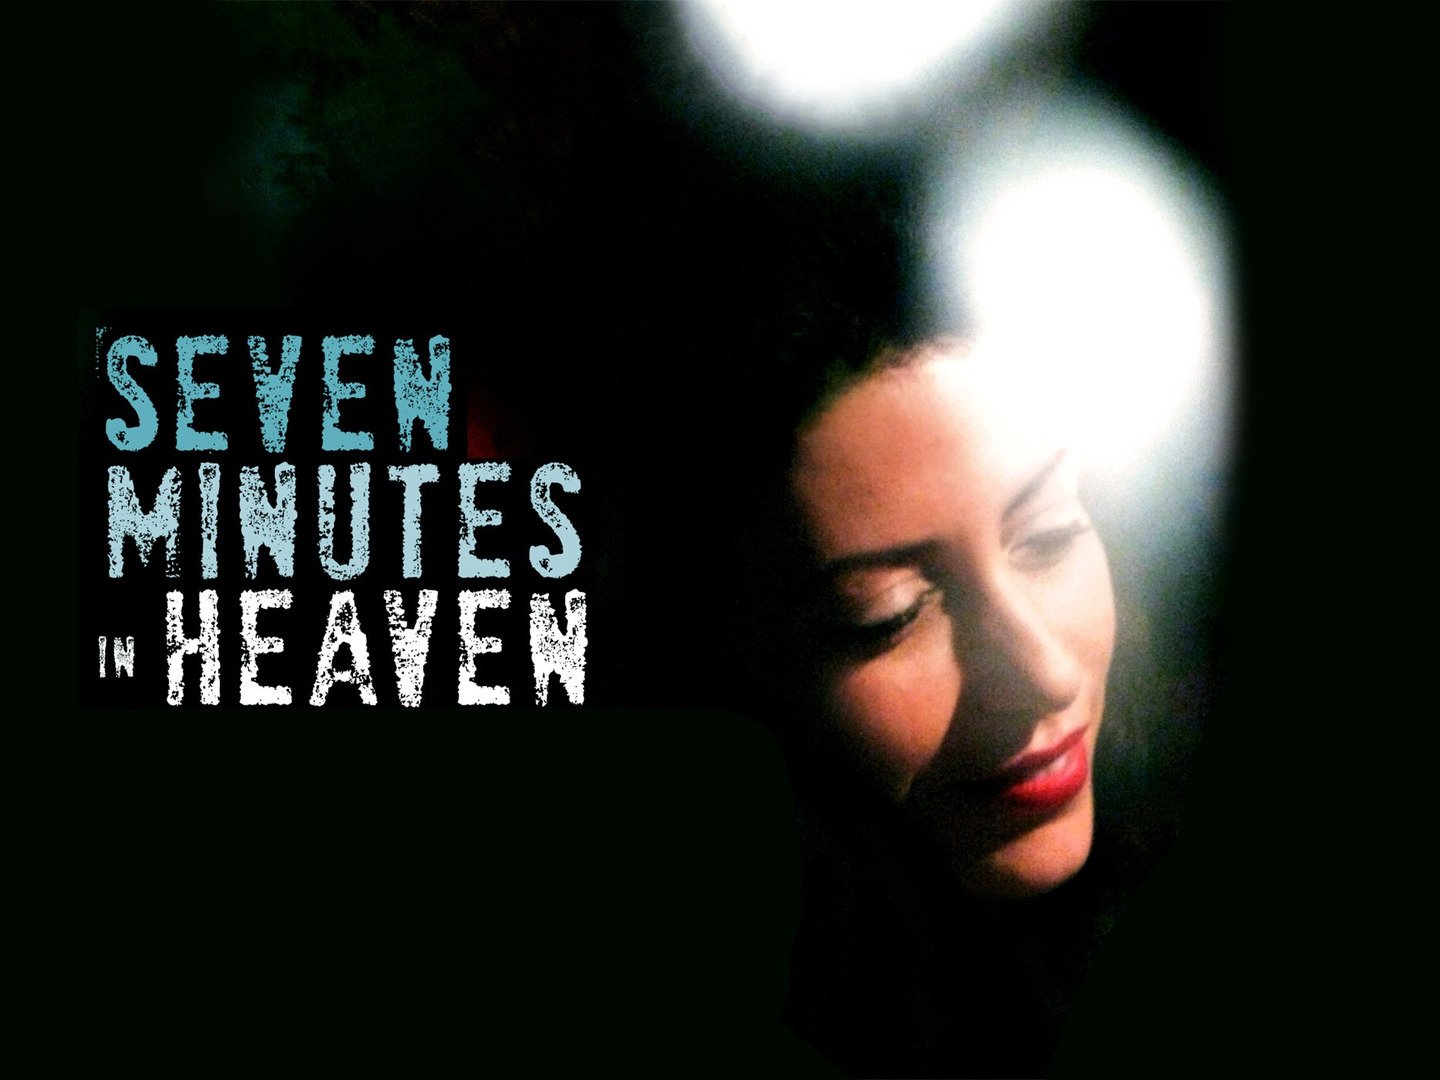 Seven Minutes In Heaven Pictures Rotten Tomatoes